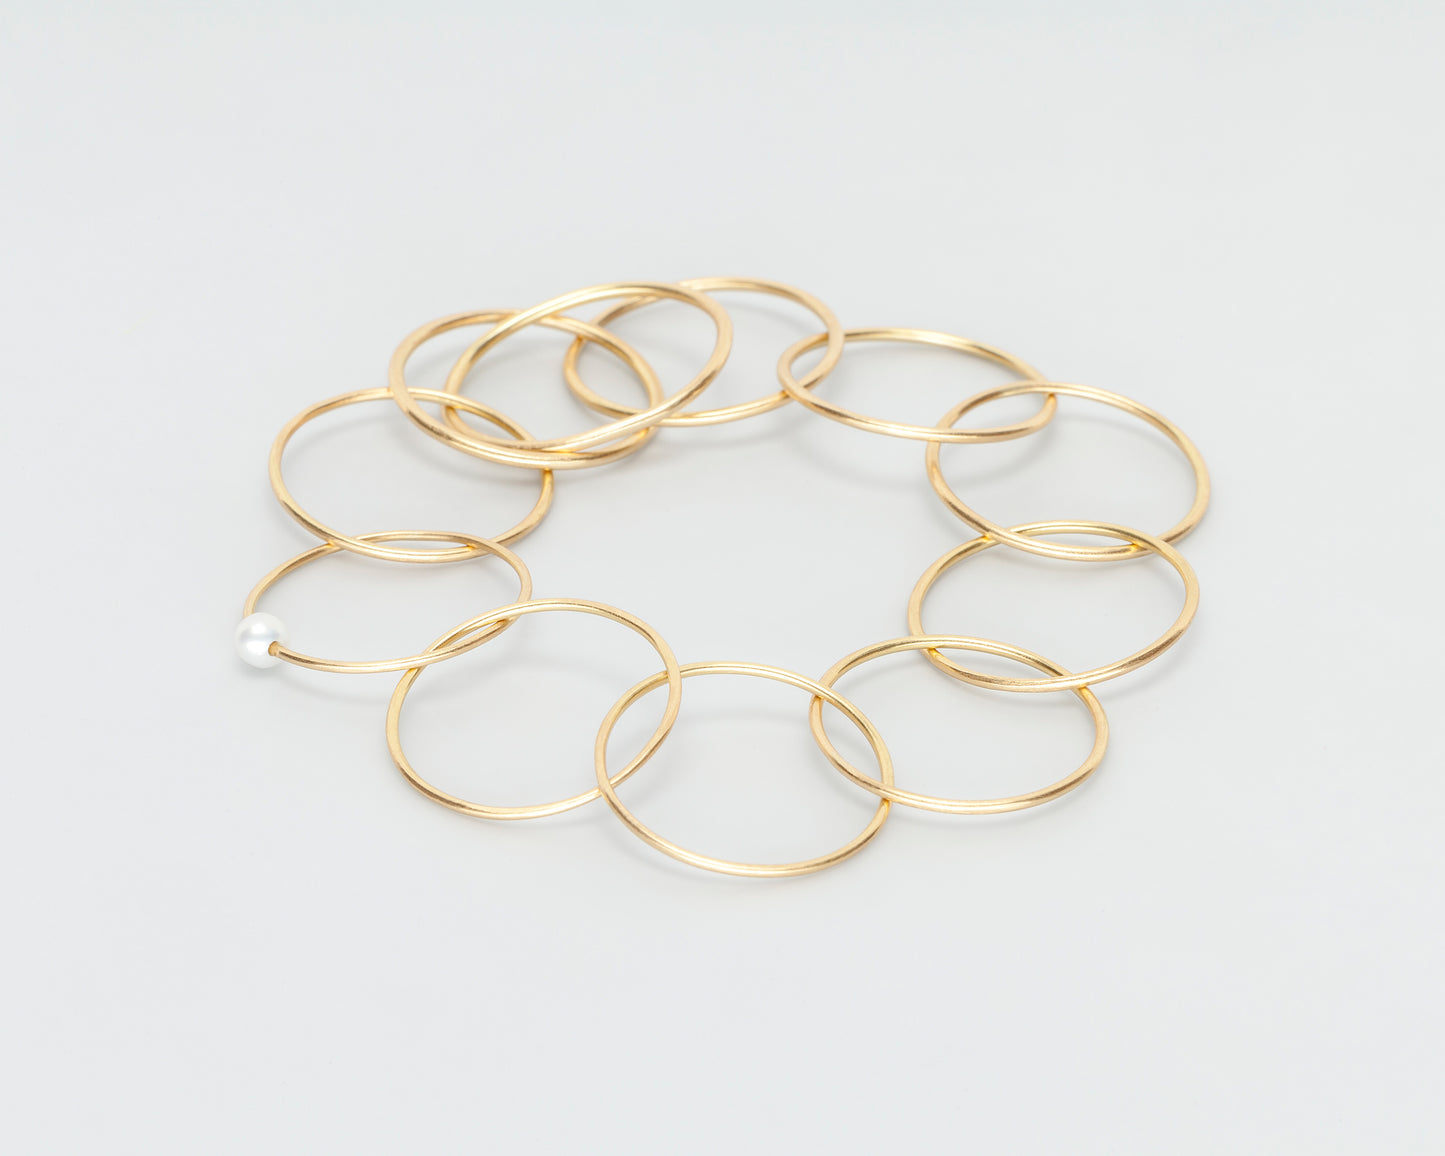 18 KT yellow gold ring bracelet with akoya pearl - NonStop